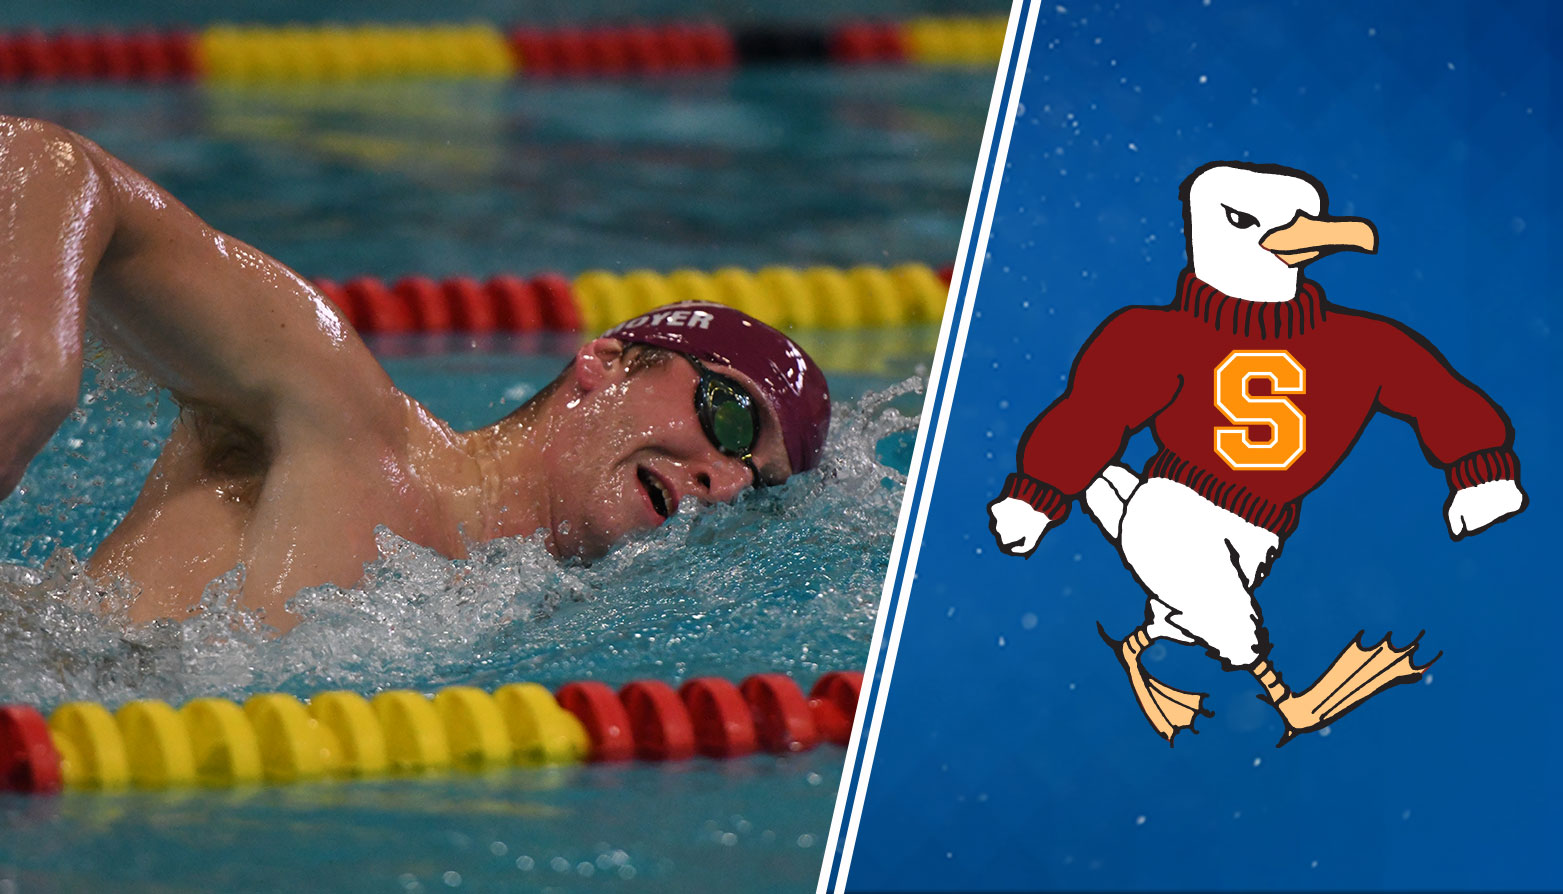 Salisbury's Peter Moyer Selected CAC Men's Swimmer of the Week